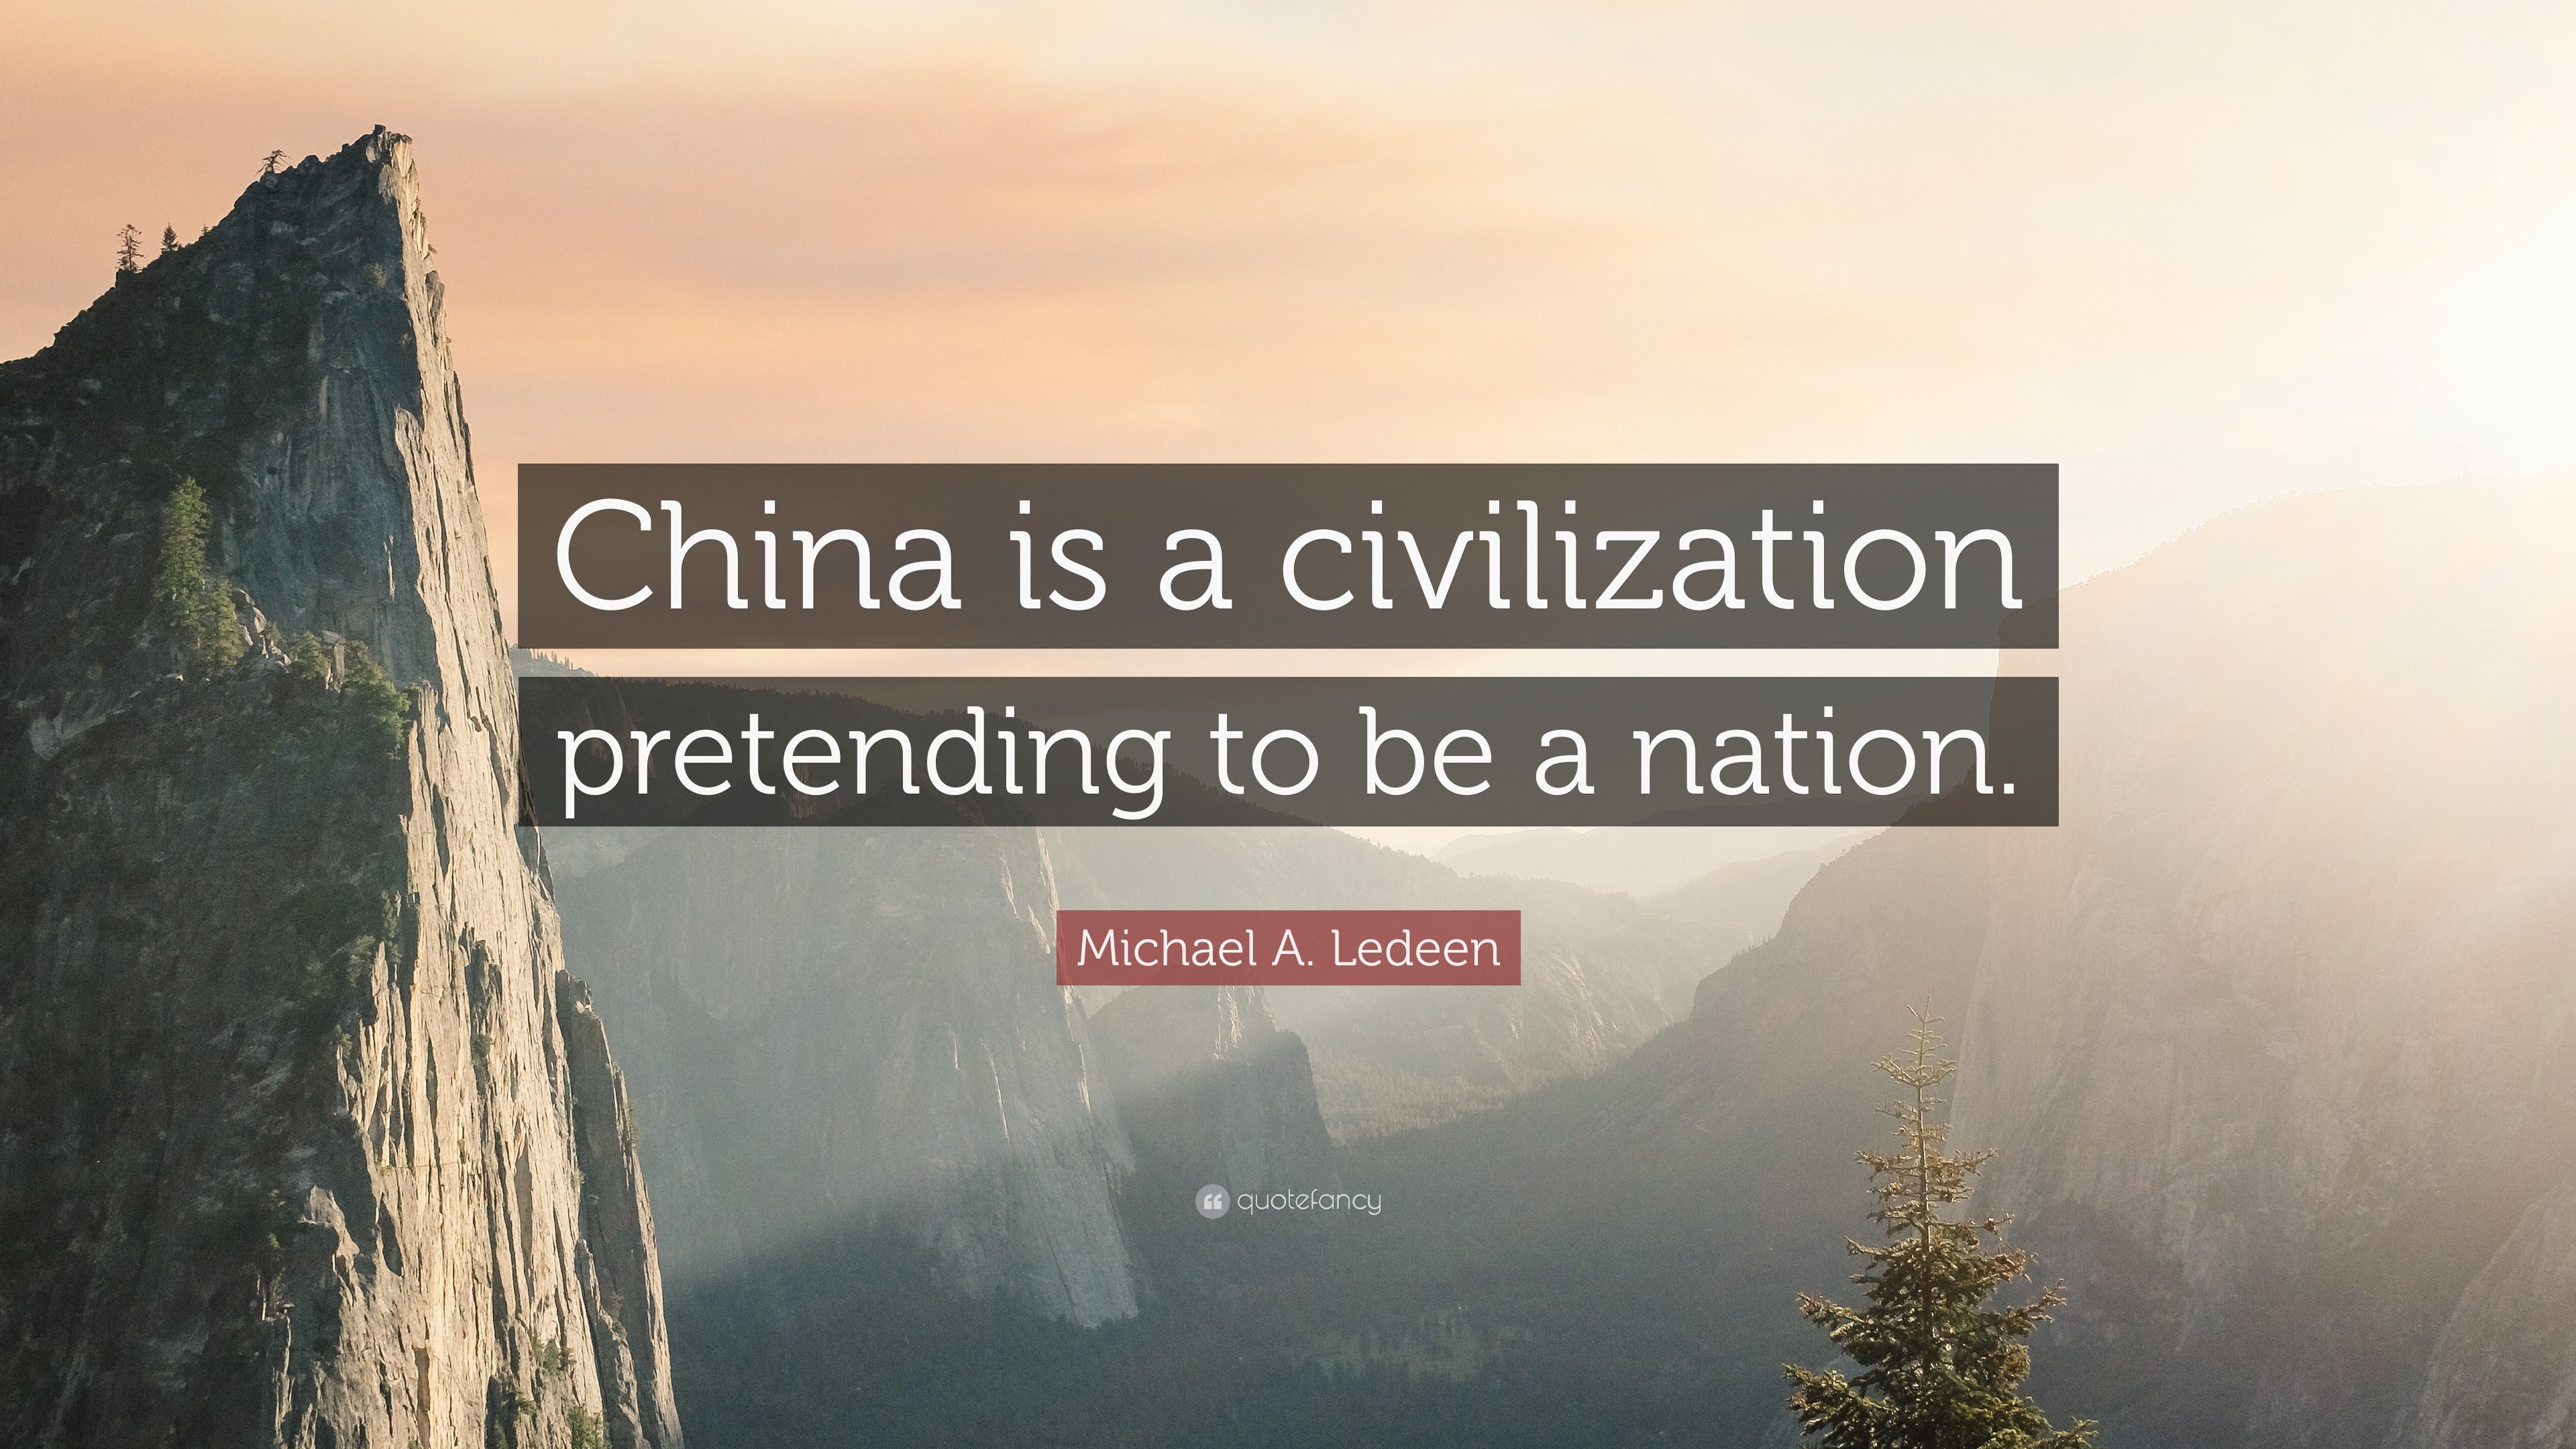 Michael Ledeen - China is a civilization pretending to be